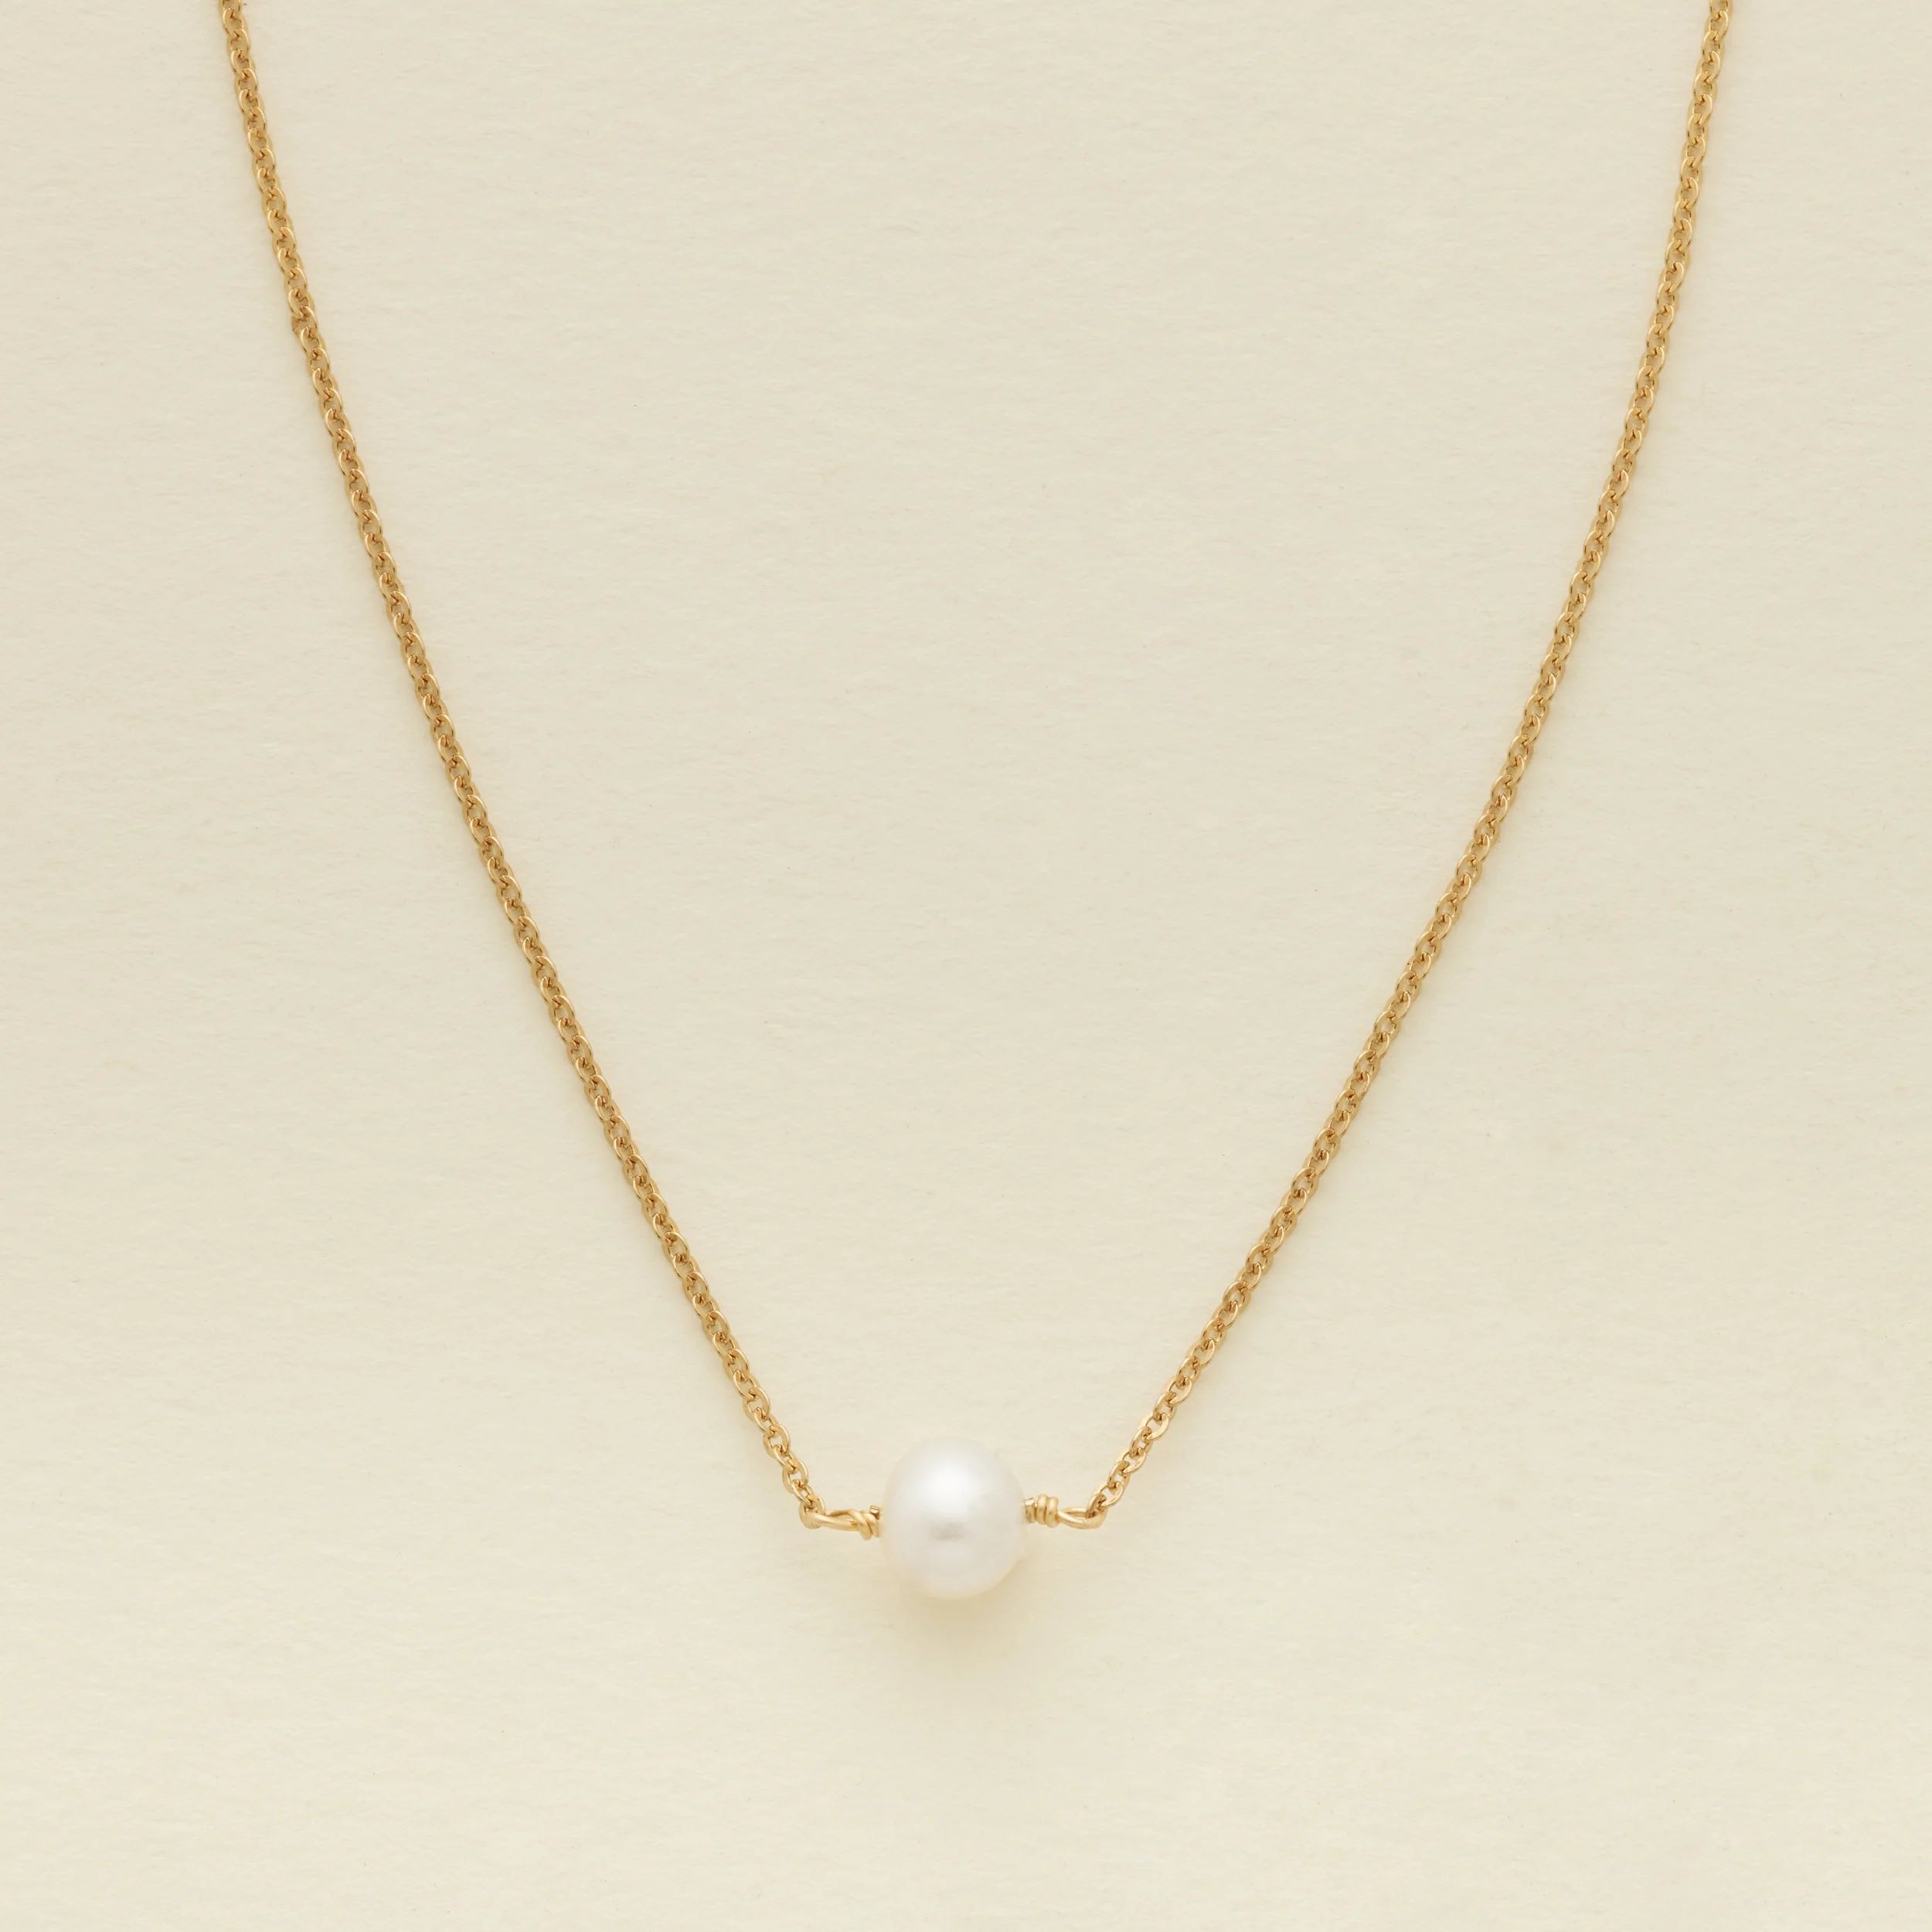 Made By Mary Pearl Choker Necklace | Simple, 14k Gold Filled, Delicate | Made by Mary (US)